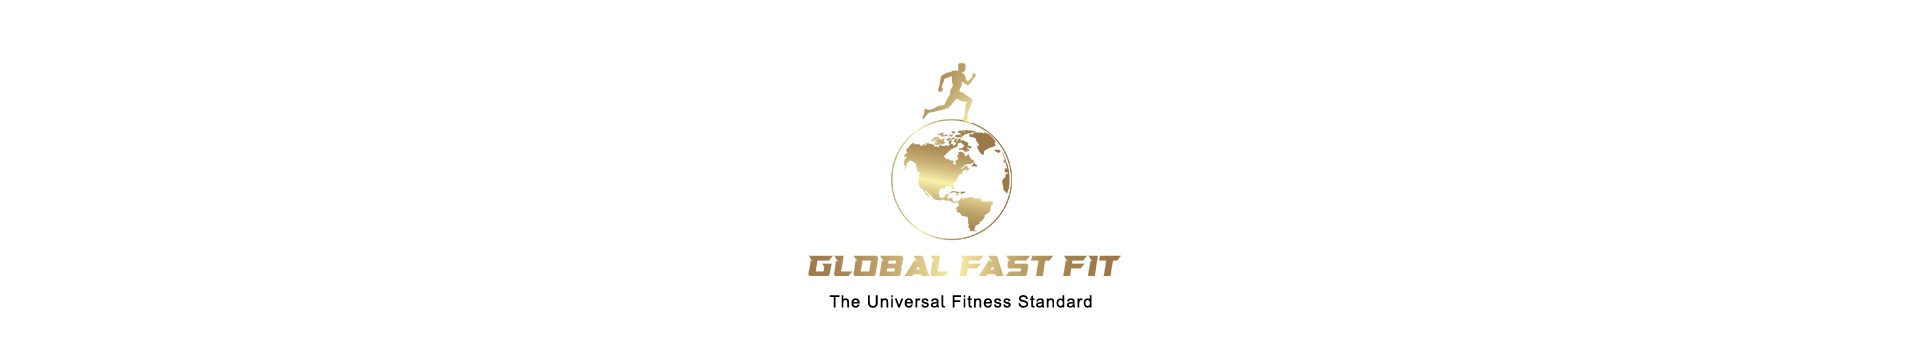 The global fitness standard